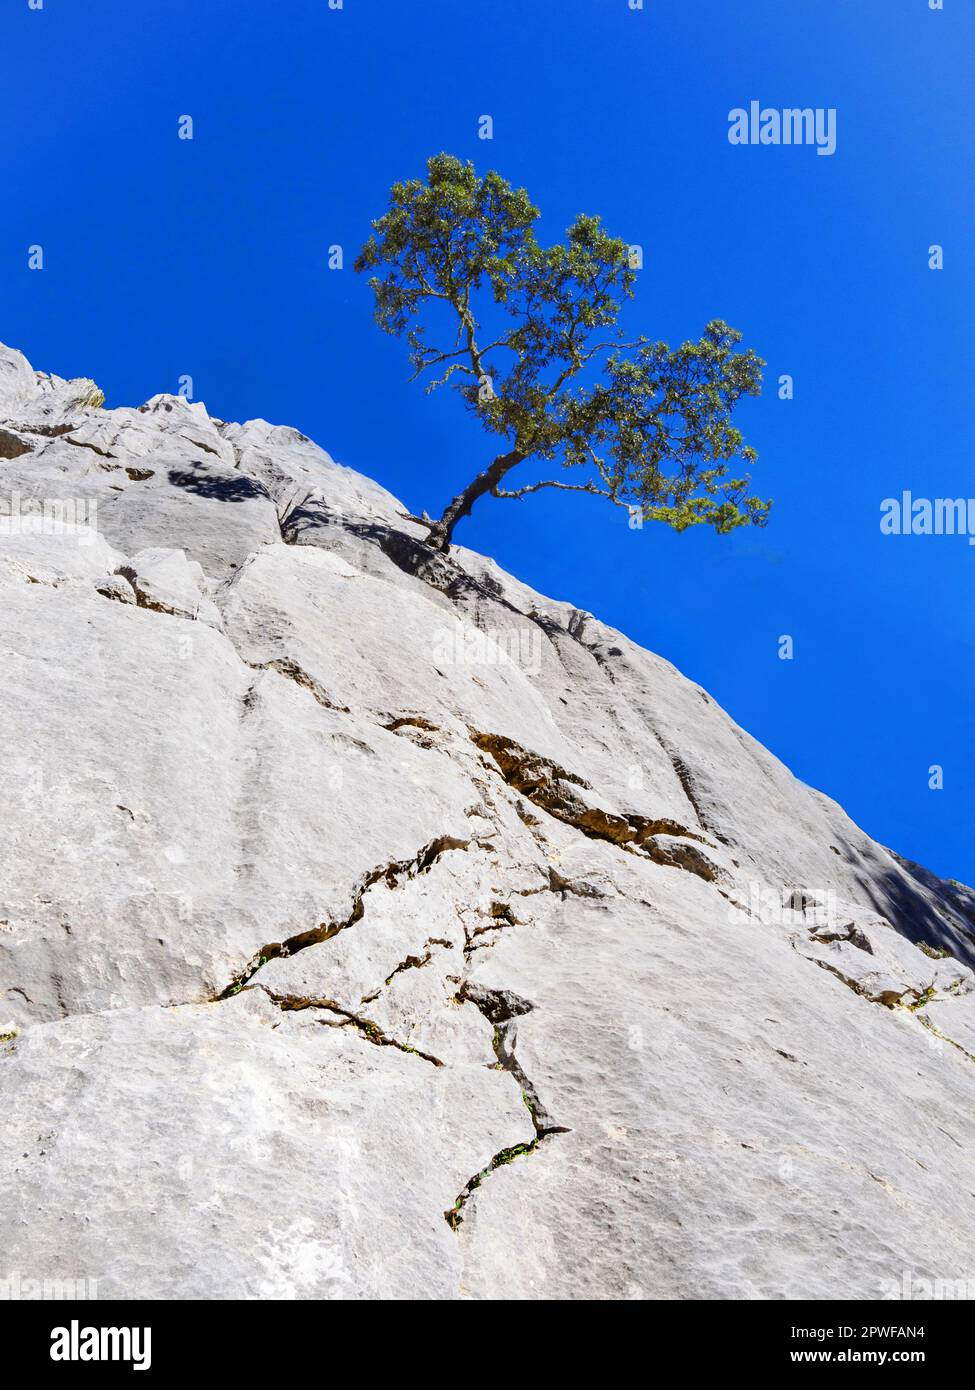 Lone Holm Oak growing on a sheer cliff face in the Tramuntana Mountains in Majorca Spain Stock Photo